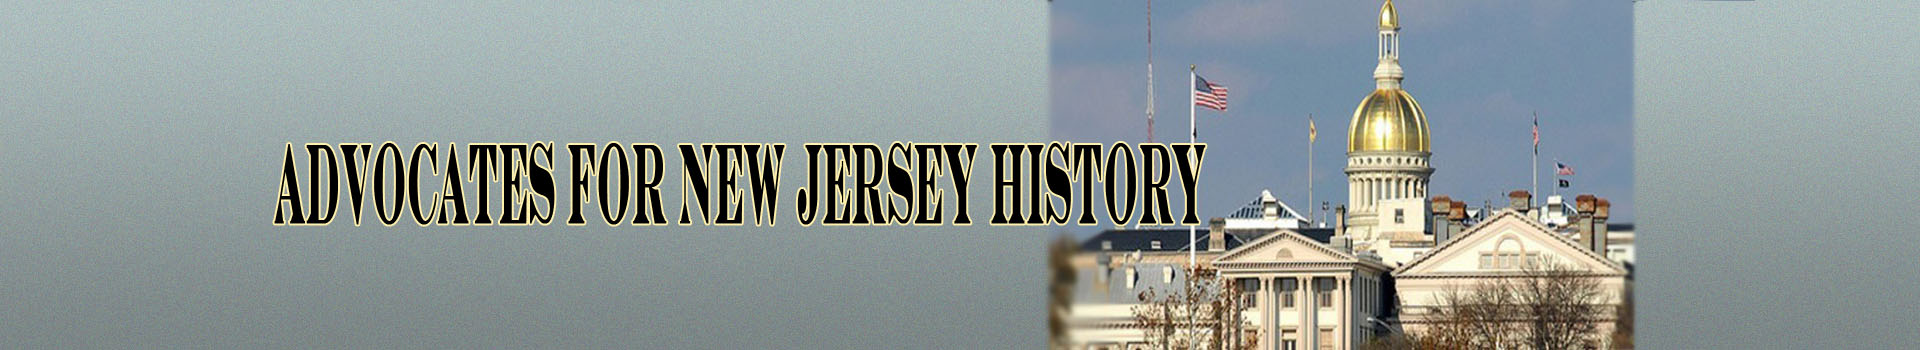 Advocates for New Jersey History